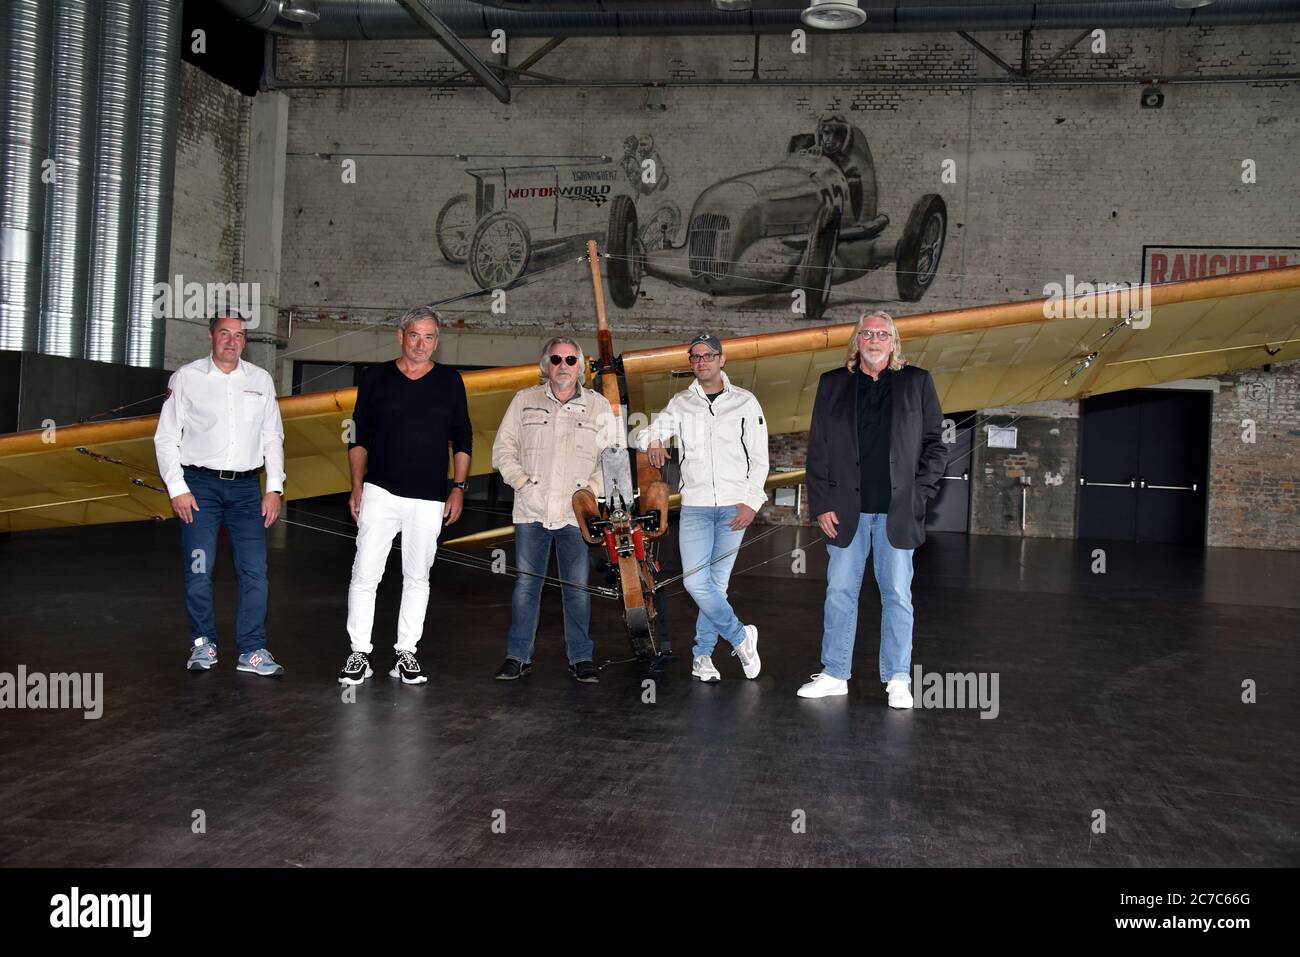 Cologne, Germany. 15th July, 2020. Dirk Strohmenger, Center- and Facility Manager at MOTORWORLD, Jürgen Walter, Catering Auftischt, musician Tommy Engel, comedian Marc Metzger and musician Jürgen Fritz pose on a school glider SG 38, glider from 1942, at the presentation of the safety and hygiene concept of the dinner show 'Weihnachtsengel' which will be shown from 20.11.2020. Credit: Horst Galuschka/dpa/Alamy Live News Stock Photo